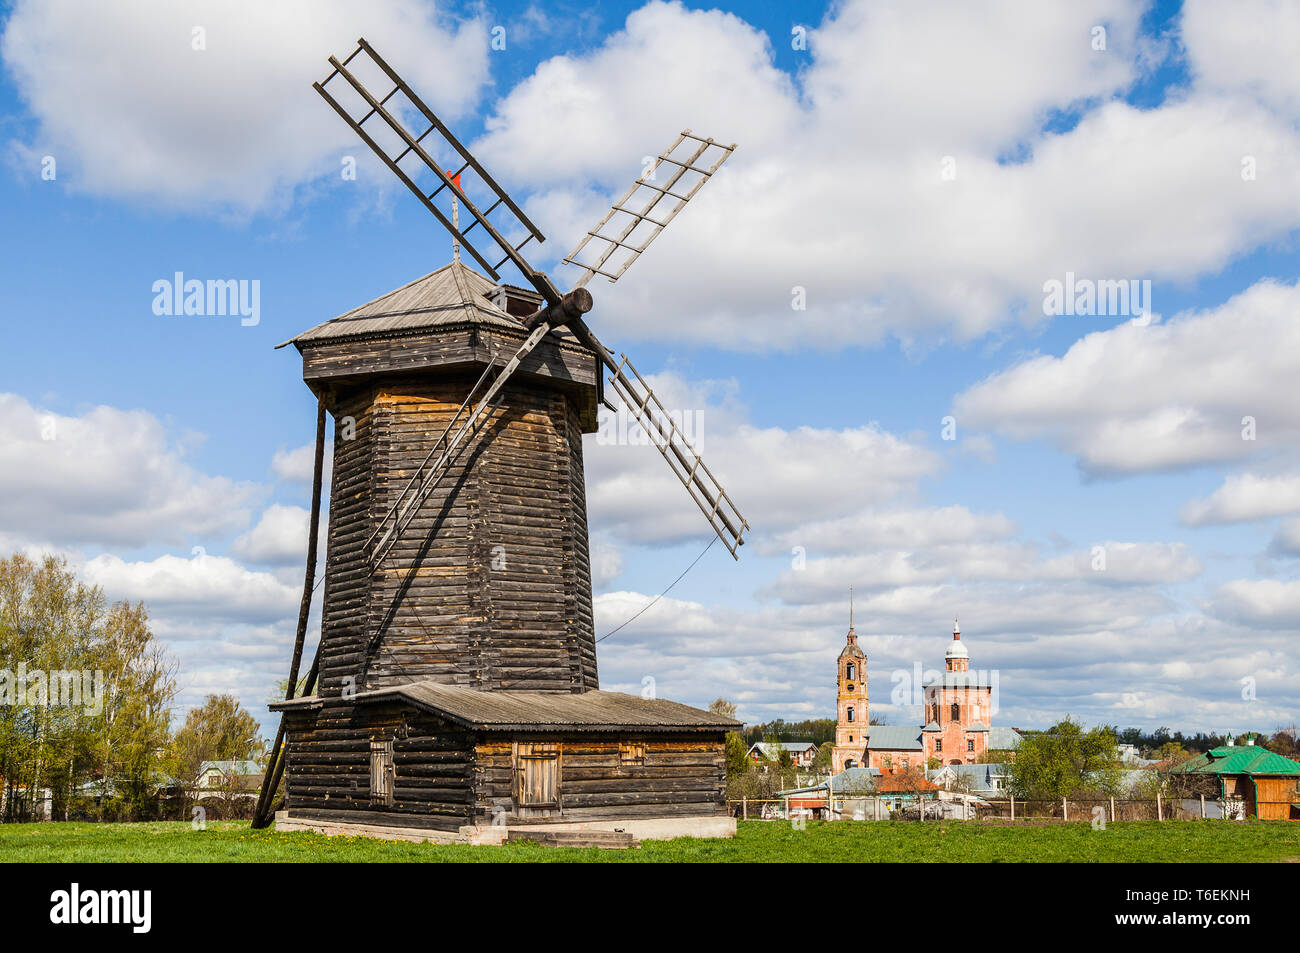 The Museum of wooden architecture in Suzdal. Stock Photo